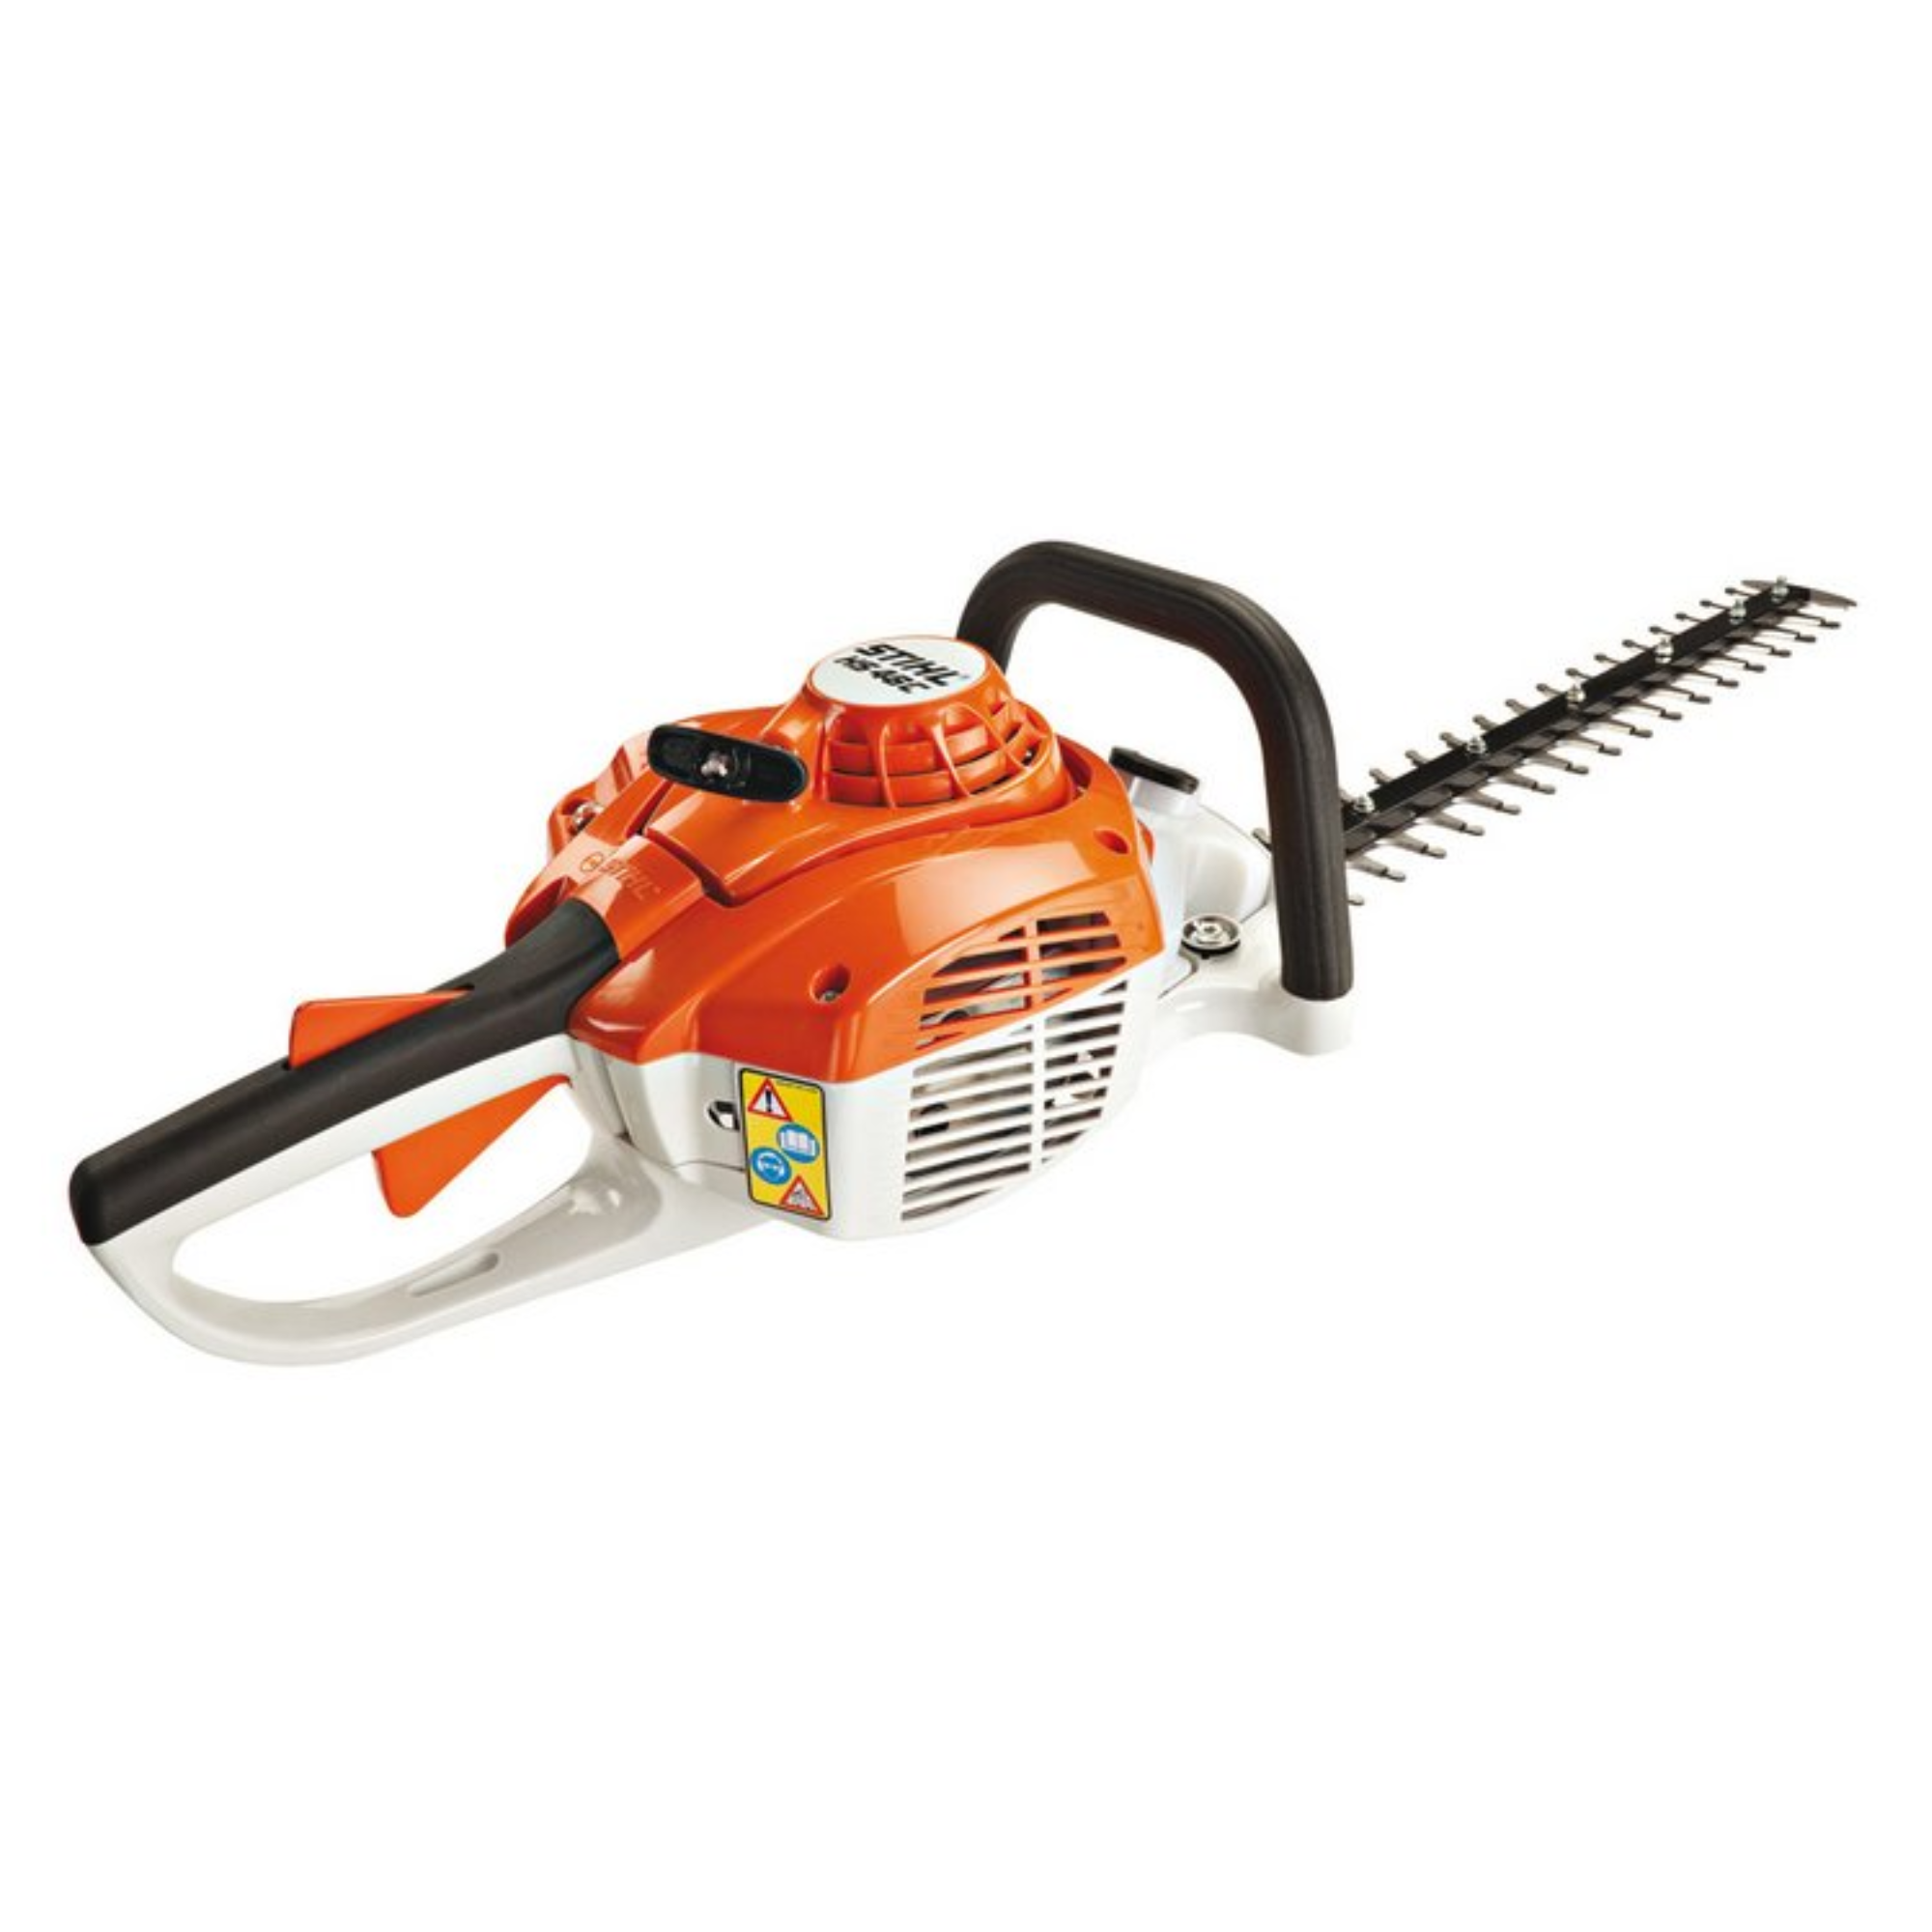 Stihl HS 46 C-E Gas Powered Hedge Trimmer with Easy2Start